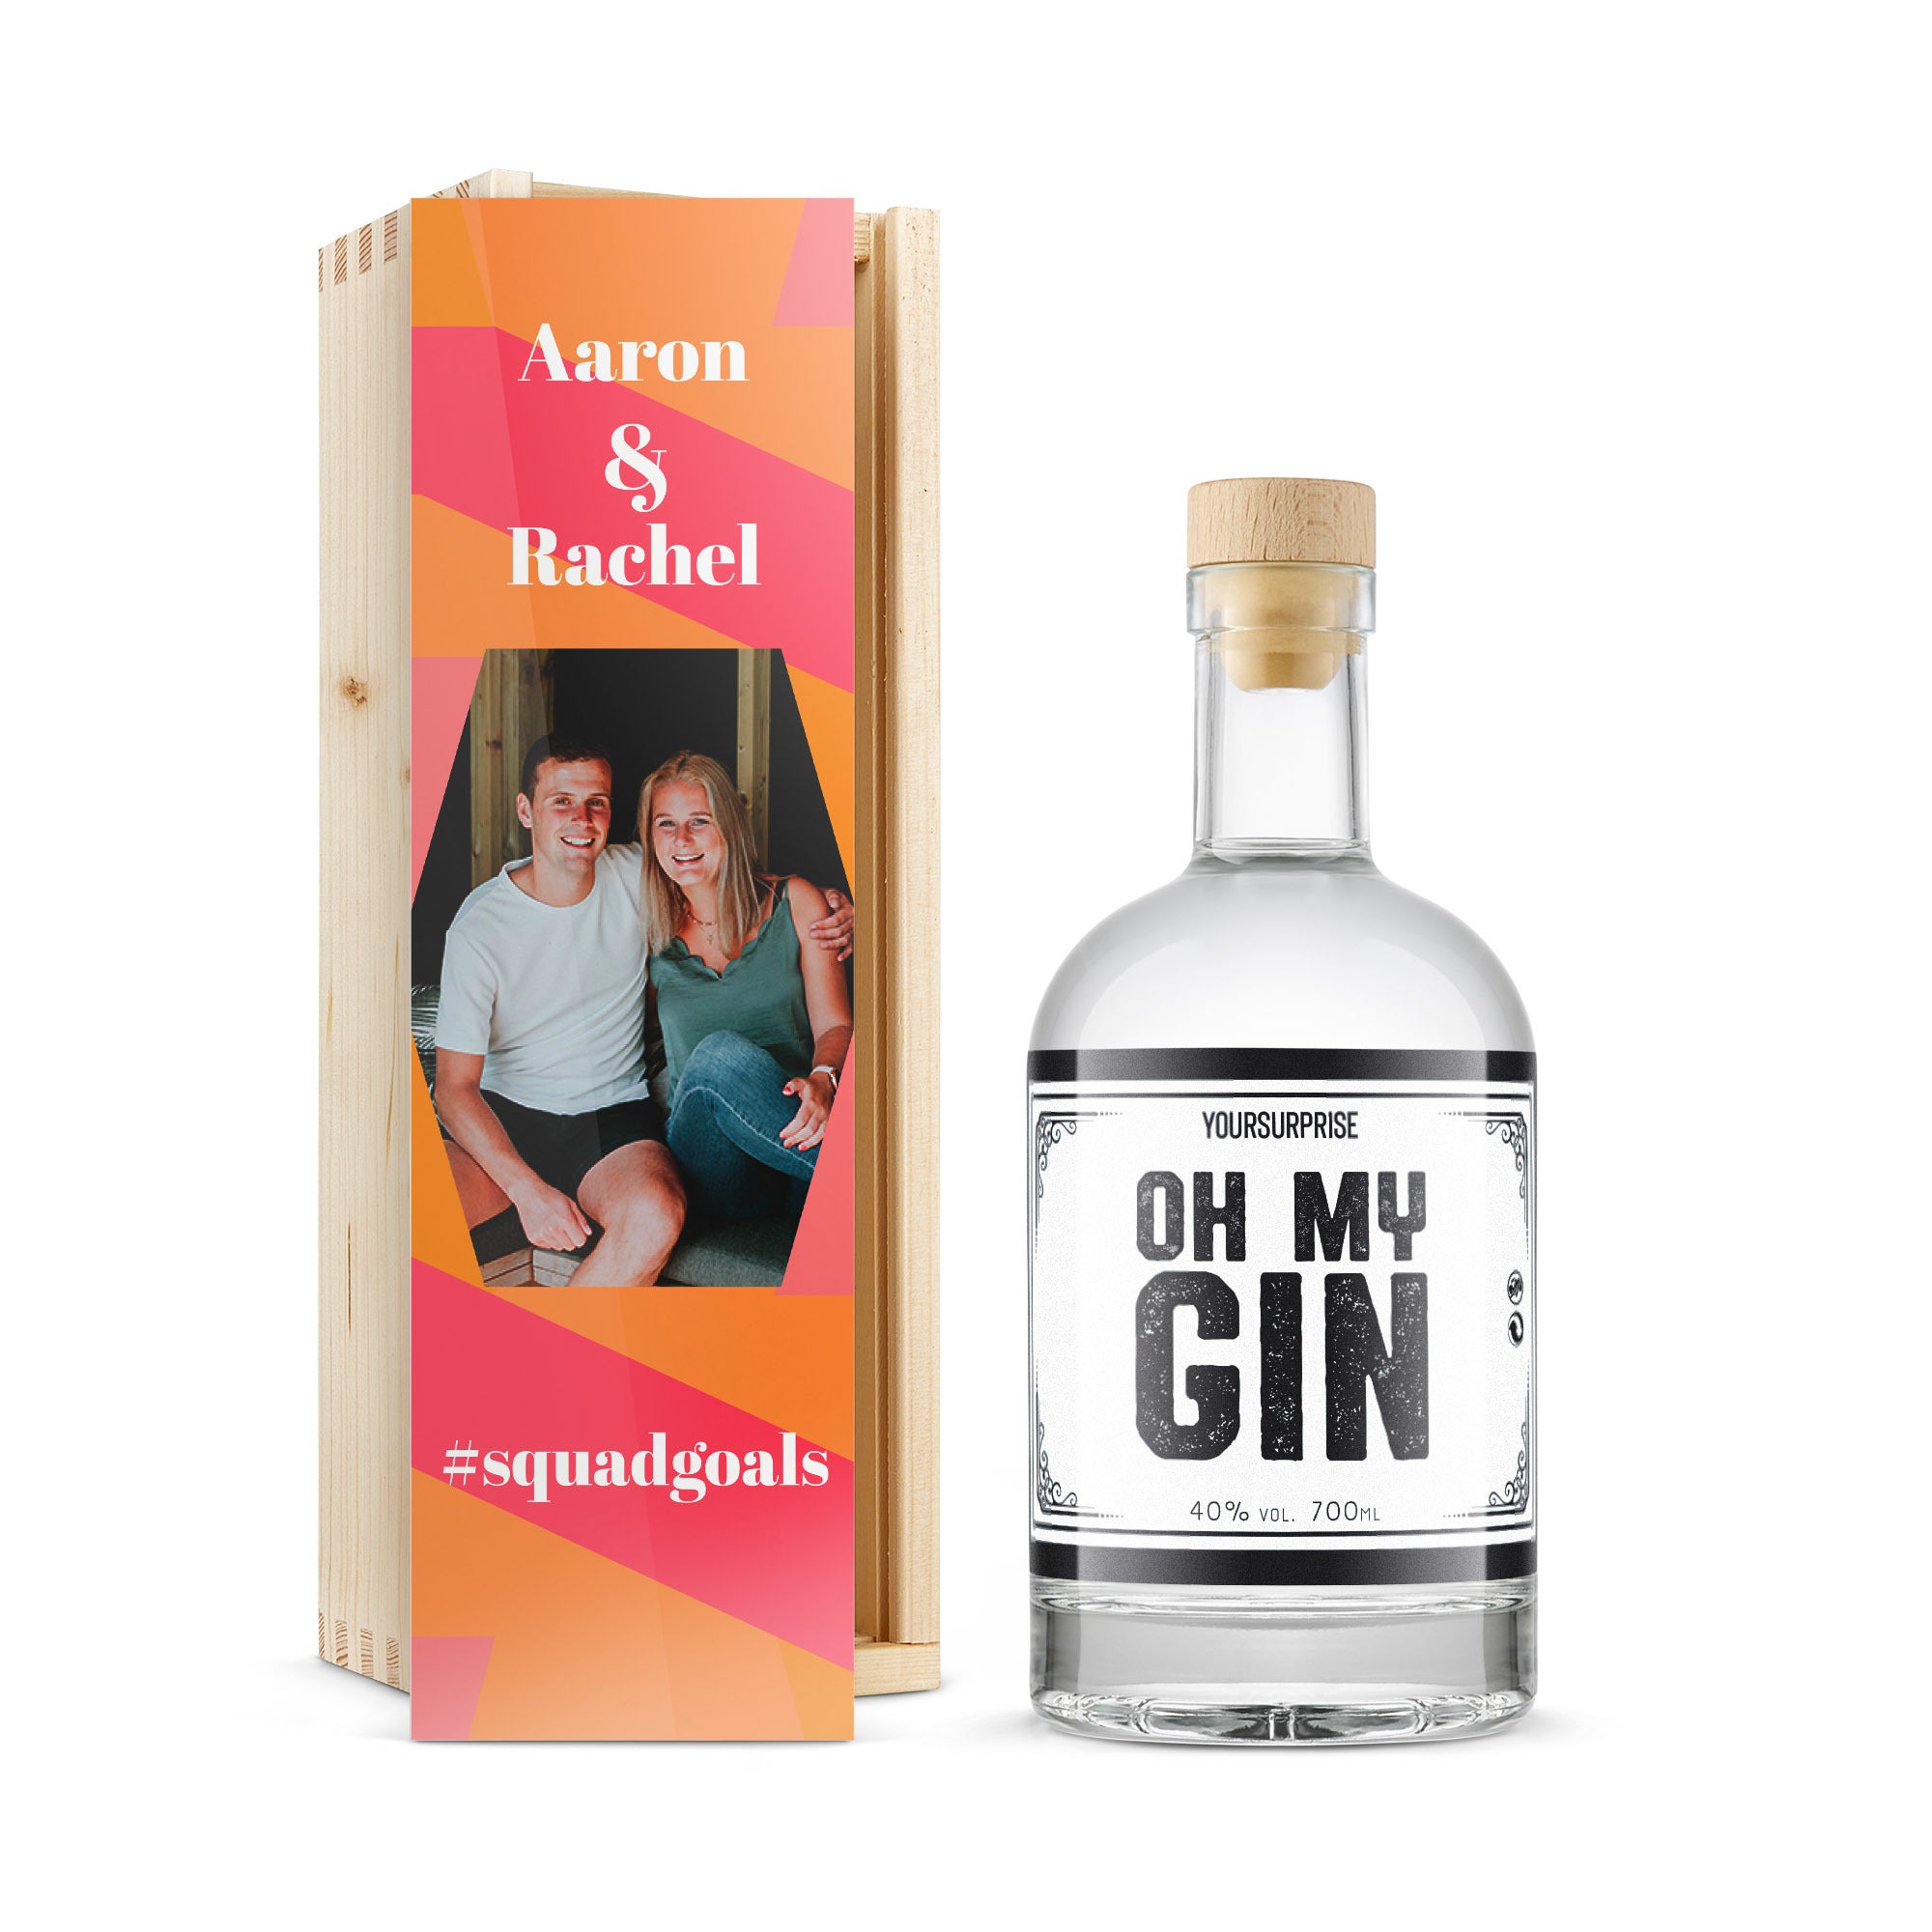 Personalised gin gift - YourSurprise - Printed wooden case